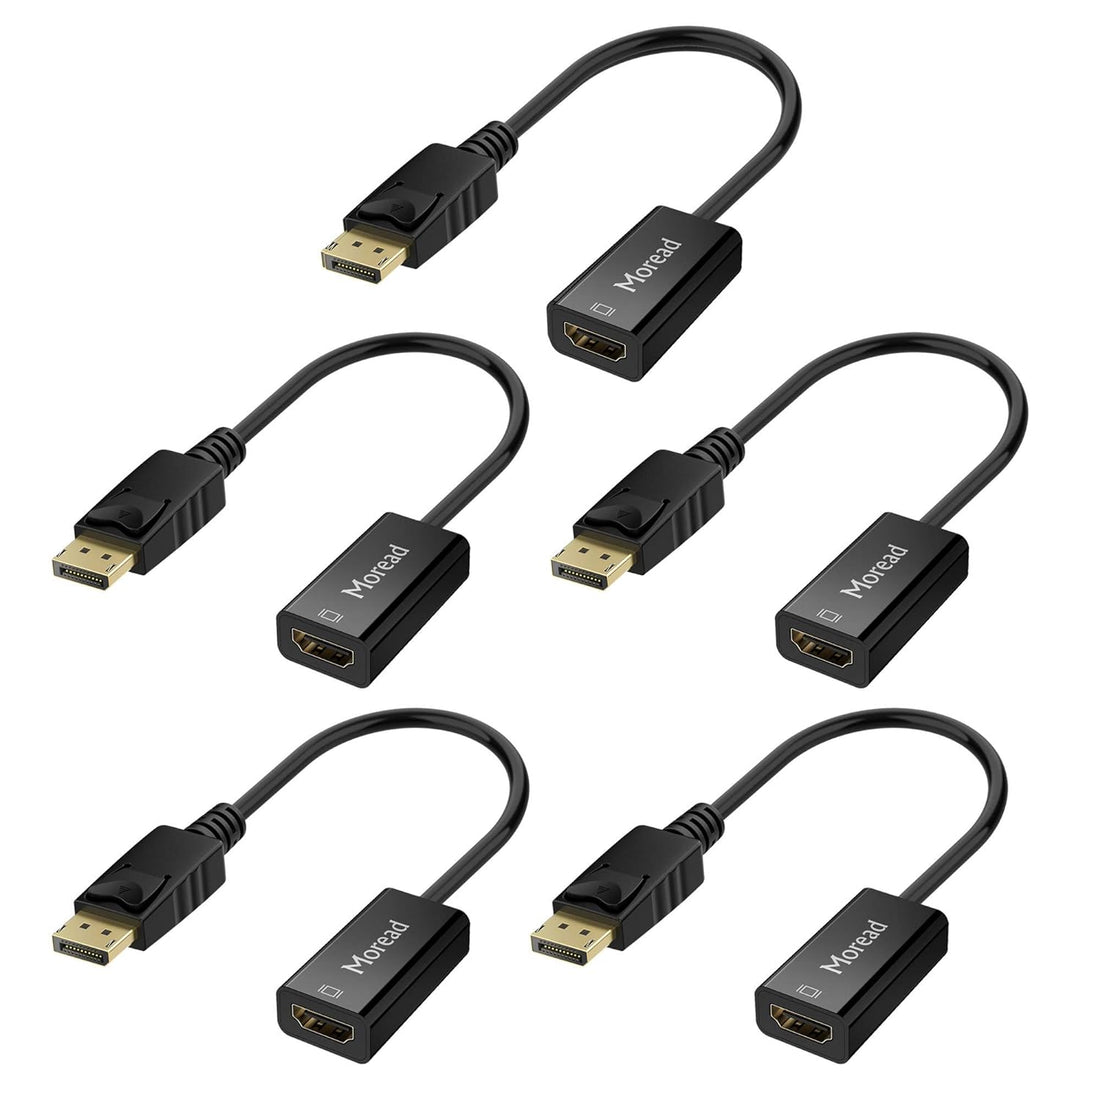 Moread DisplayPort to HDMI Adapter, 5 Pack, Gold-Plated Display Port to HDMI Converter, DP to HDMI Cord (Male to Female) Compatible with Computer, Desktop, Laptop, PC, Monitor, Projector, HDTV - Black